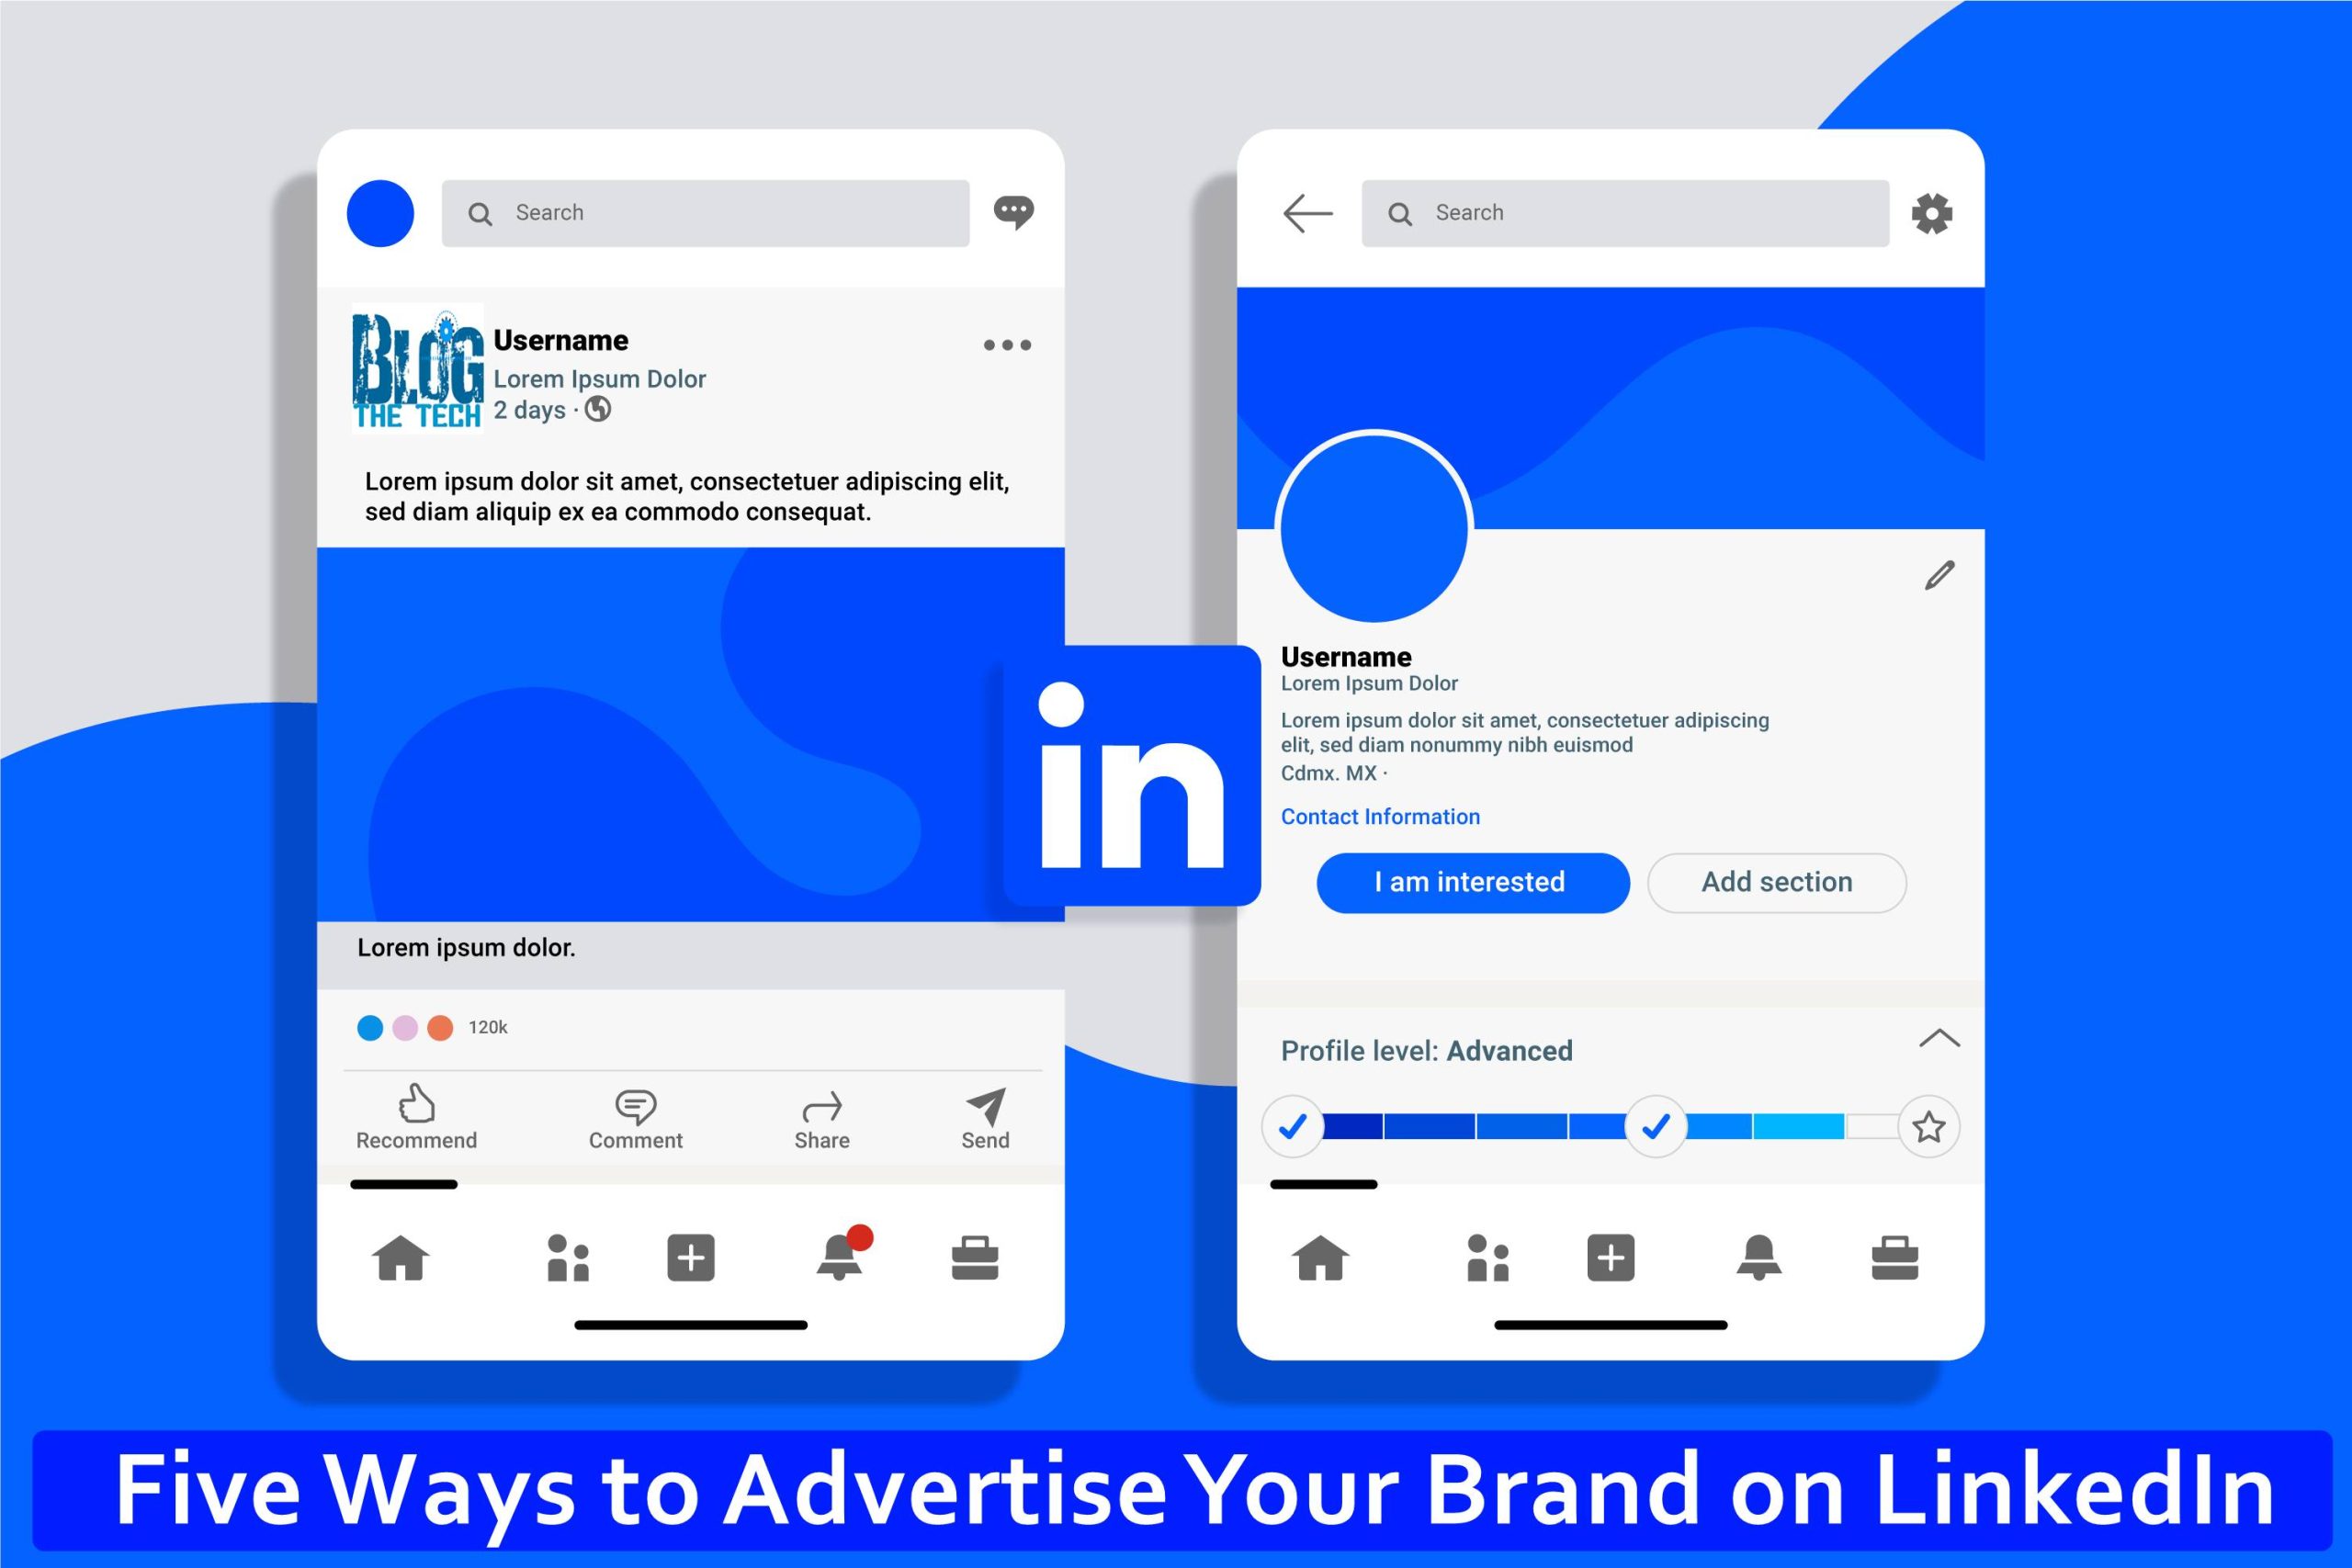 Five Ways to Advertise Your Brand on LinkedIn